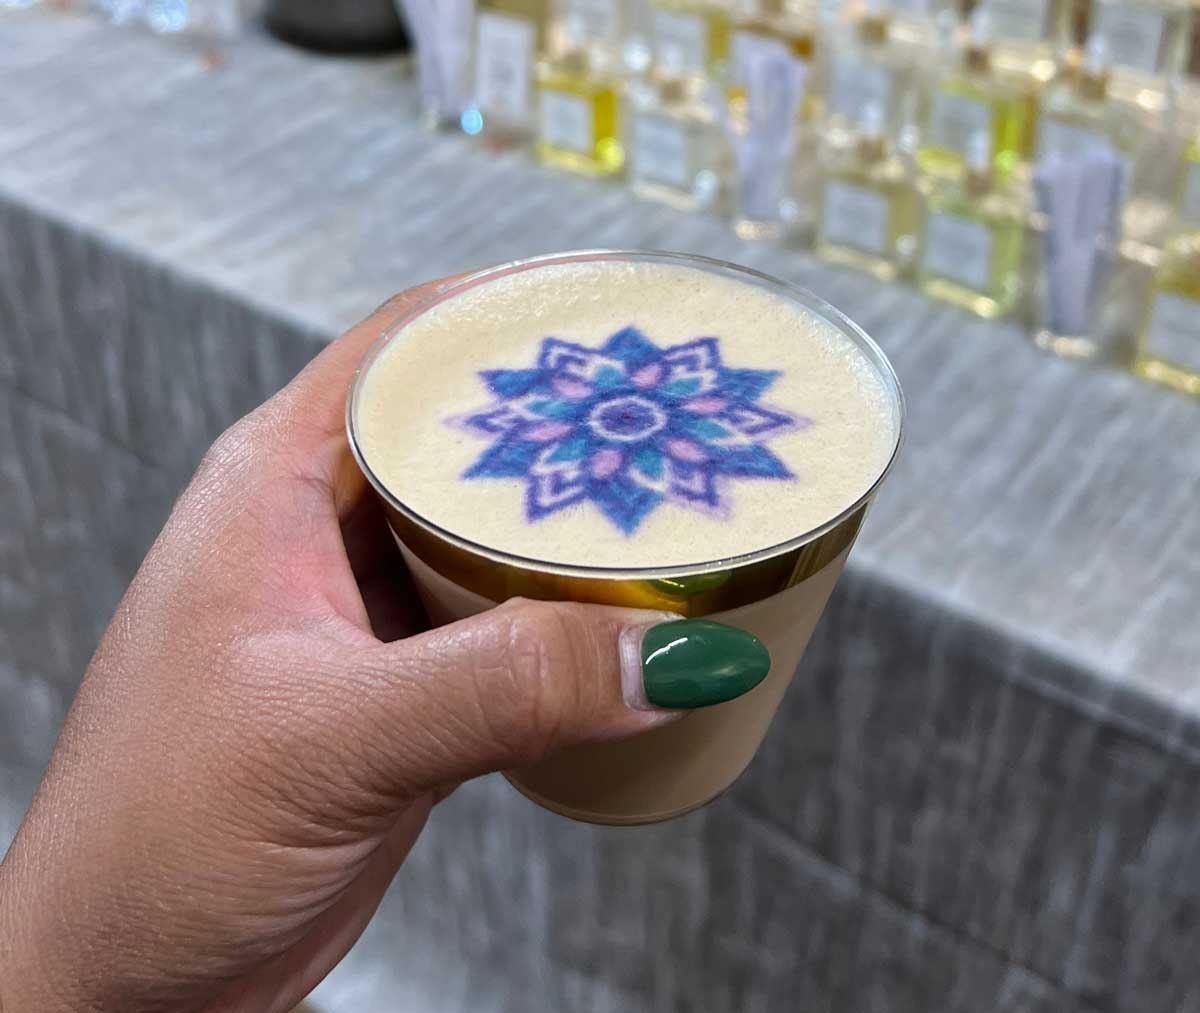 A hand holding a cup of coffee with latte art on a patterned surface.